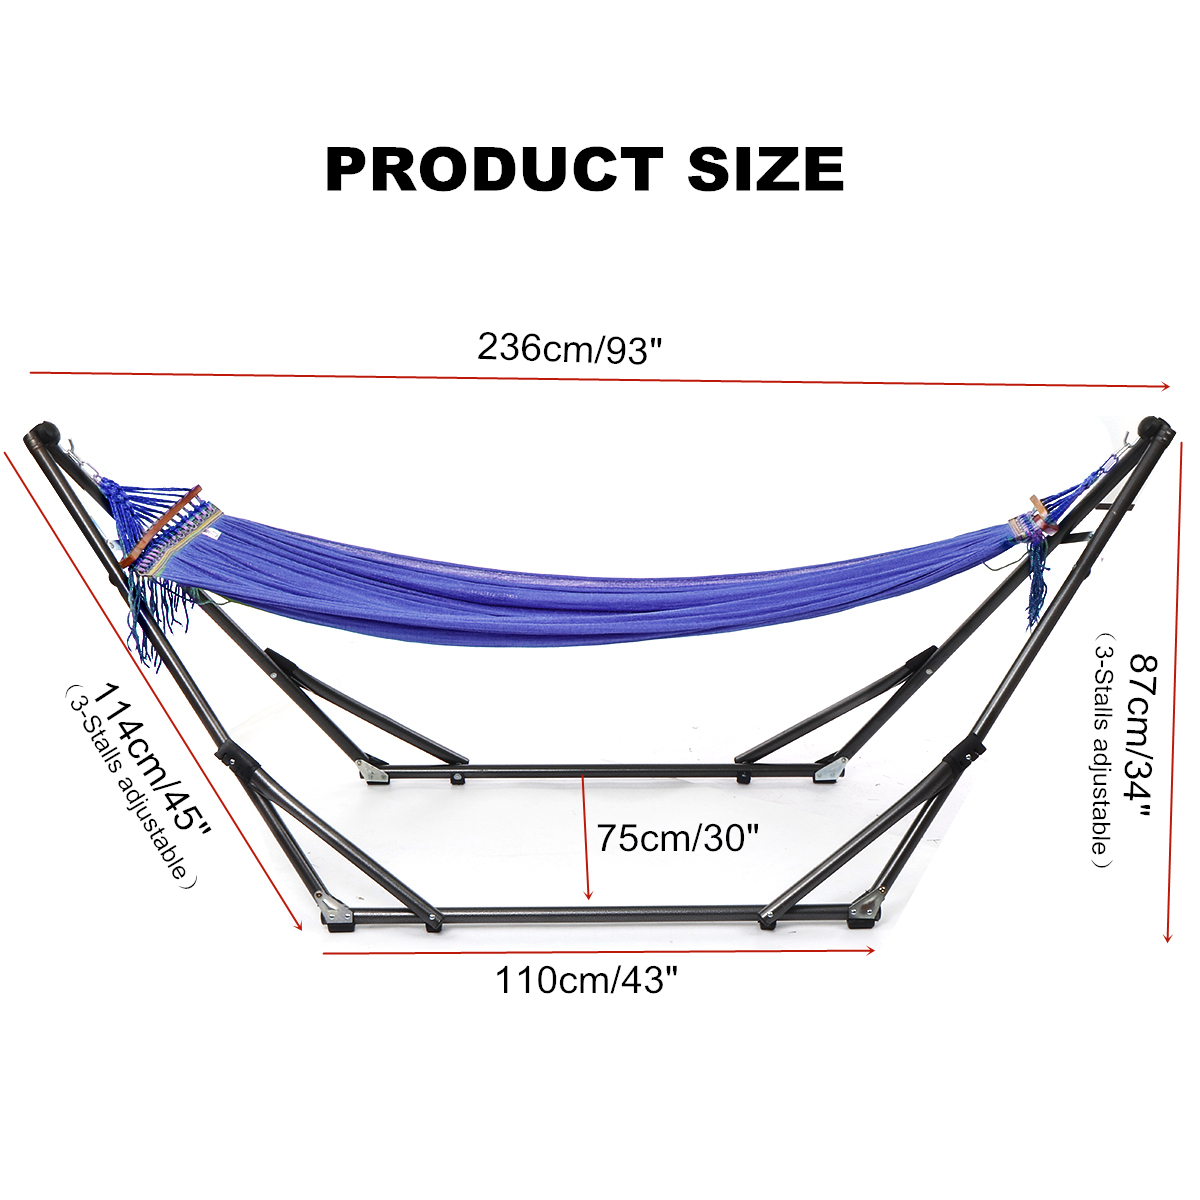 Portable Canvas Hammock Stand Portable Multifunctional Practical Outdoor Garden Swing Hammock Single Hanging Chair Bed Leisure Camping Travel 34